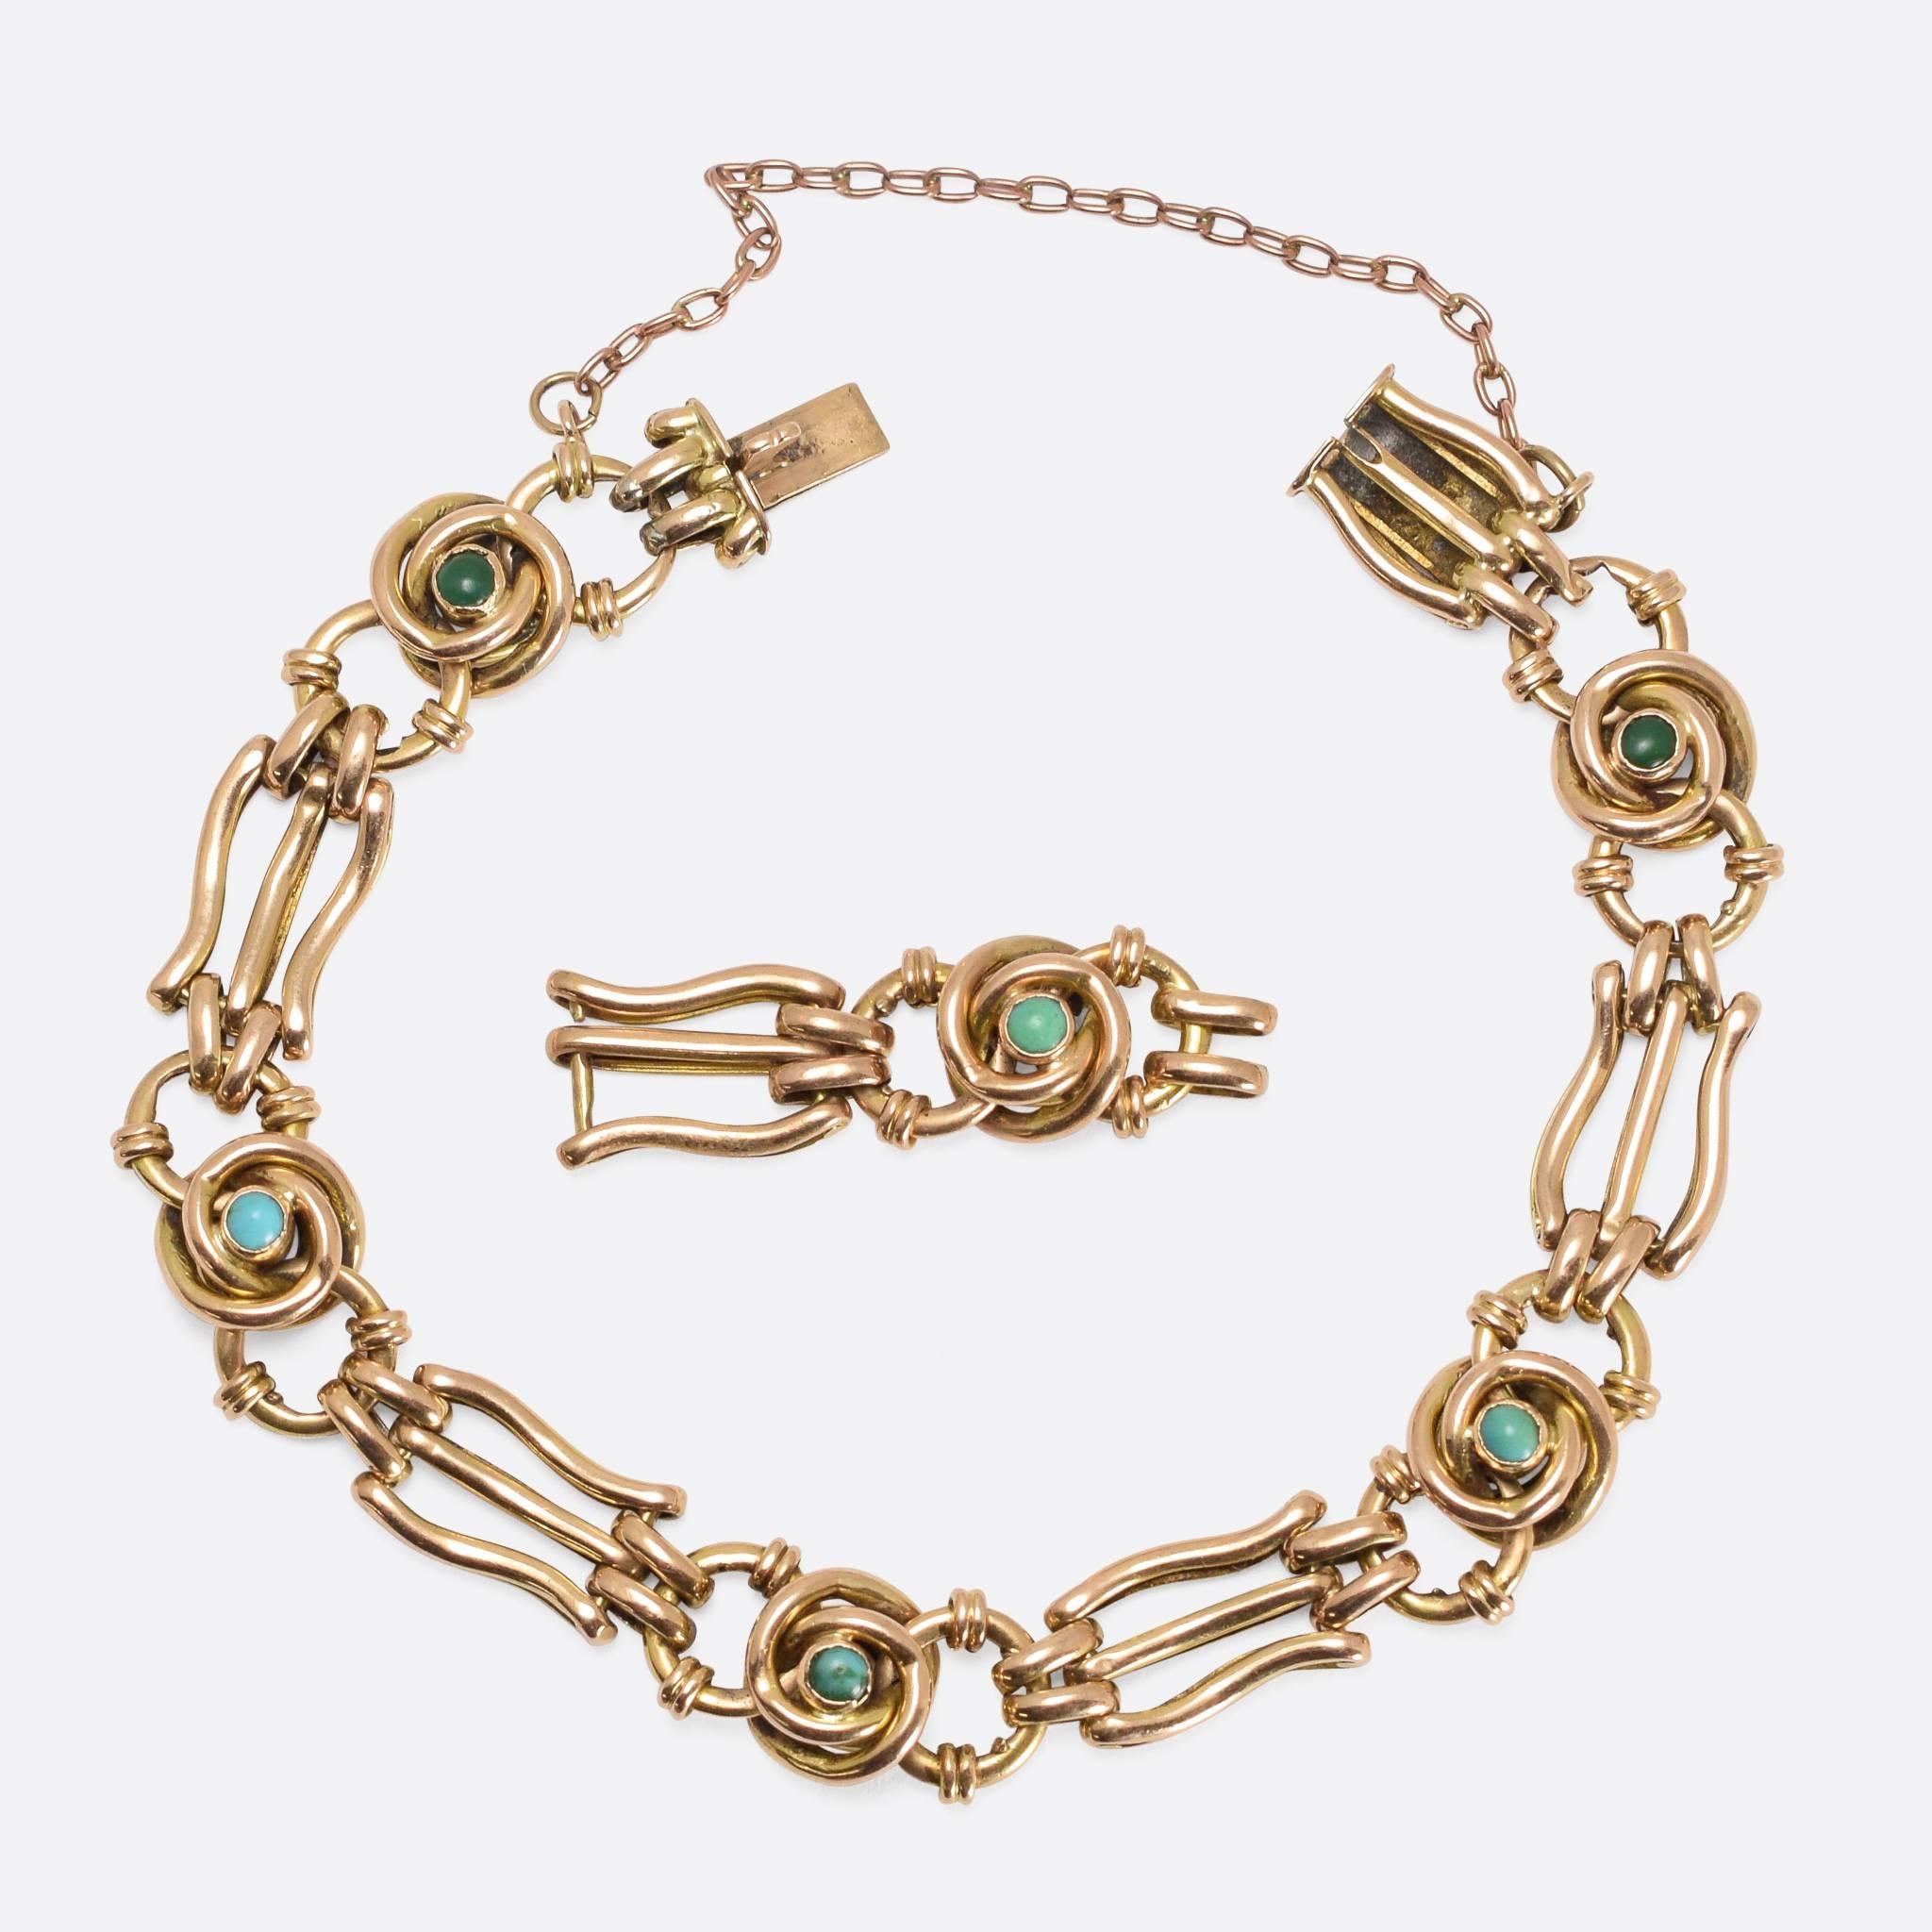 This elegant 15k gold bracelet is set with natural turquoise cabochons, with attractive alternating lyre and infinity knot links. The styling is very typical of the Art Nouveau era, with graceful curves and lines inspired by nature themes. Also